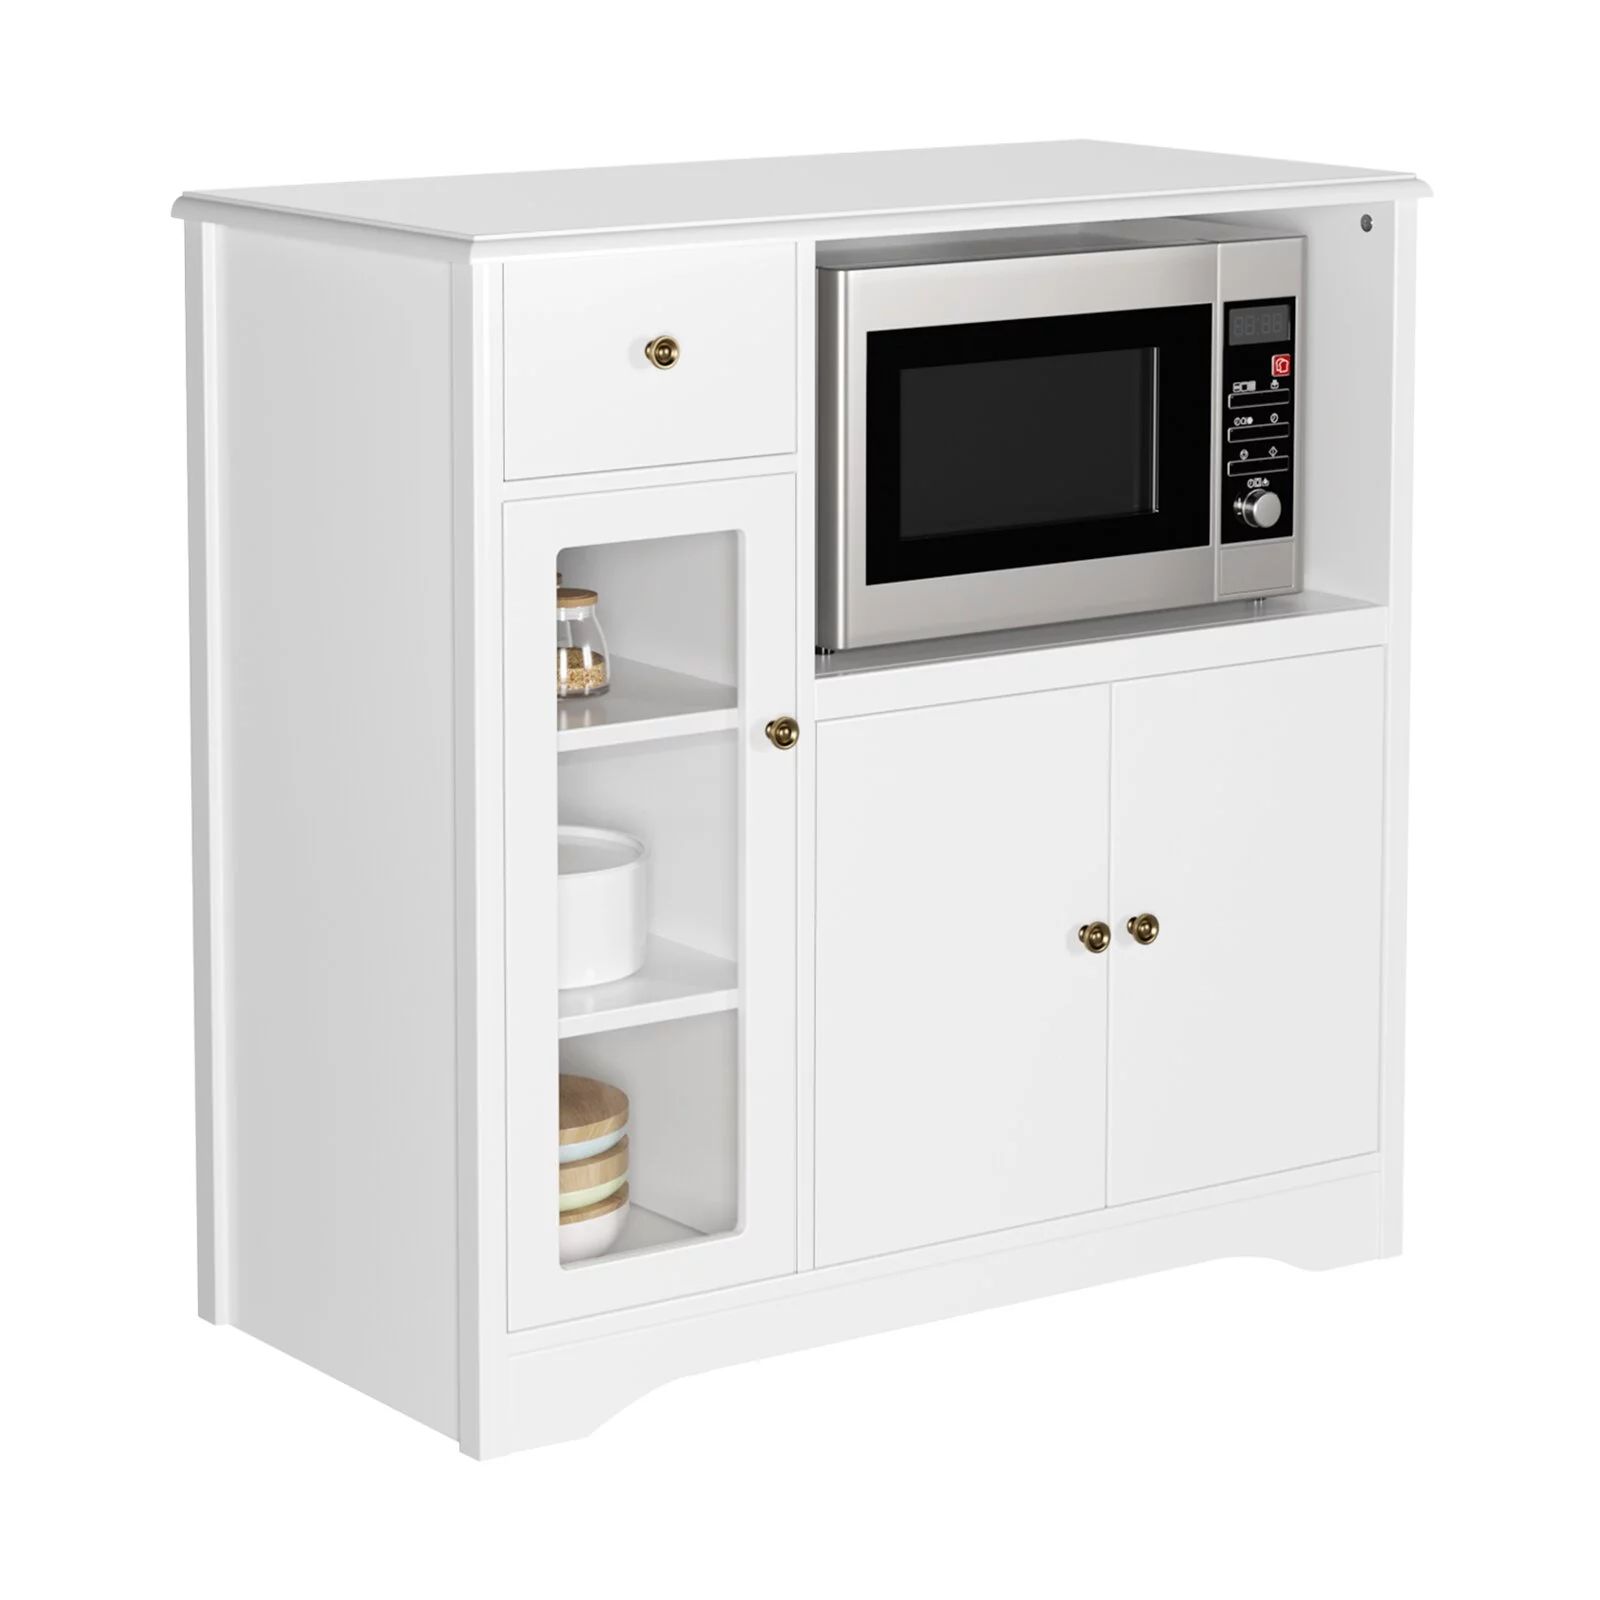 Homfa Microwave Cabinet with Hutch, Kitchen Pantry Cabinet Sideboard with Adjustable Shelves and ... | Walmart (US)